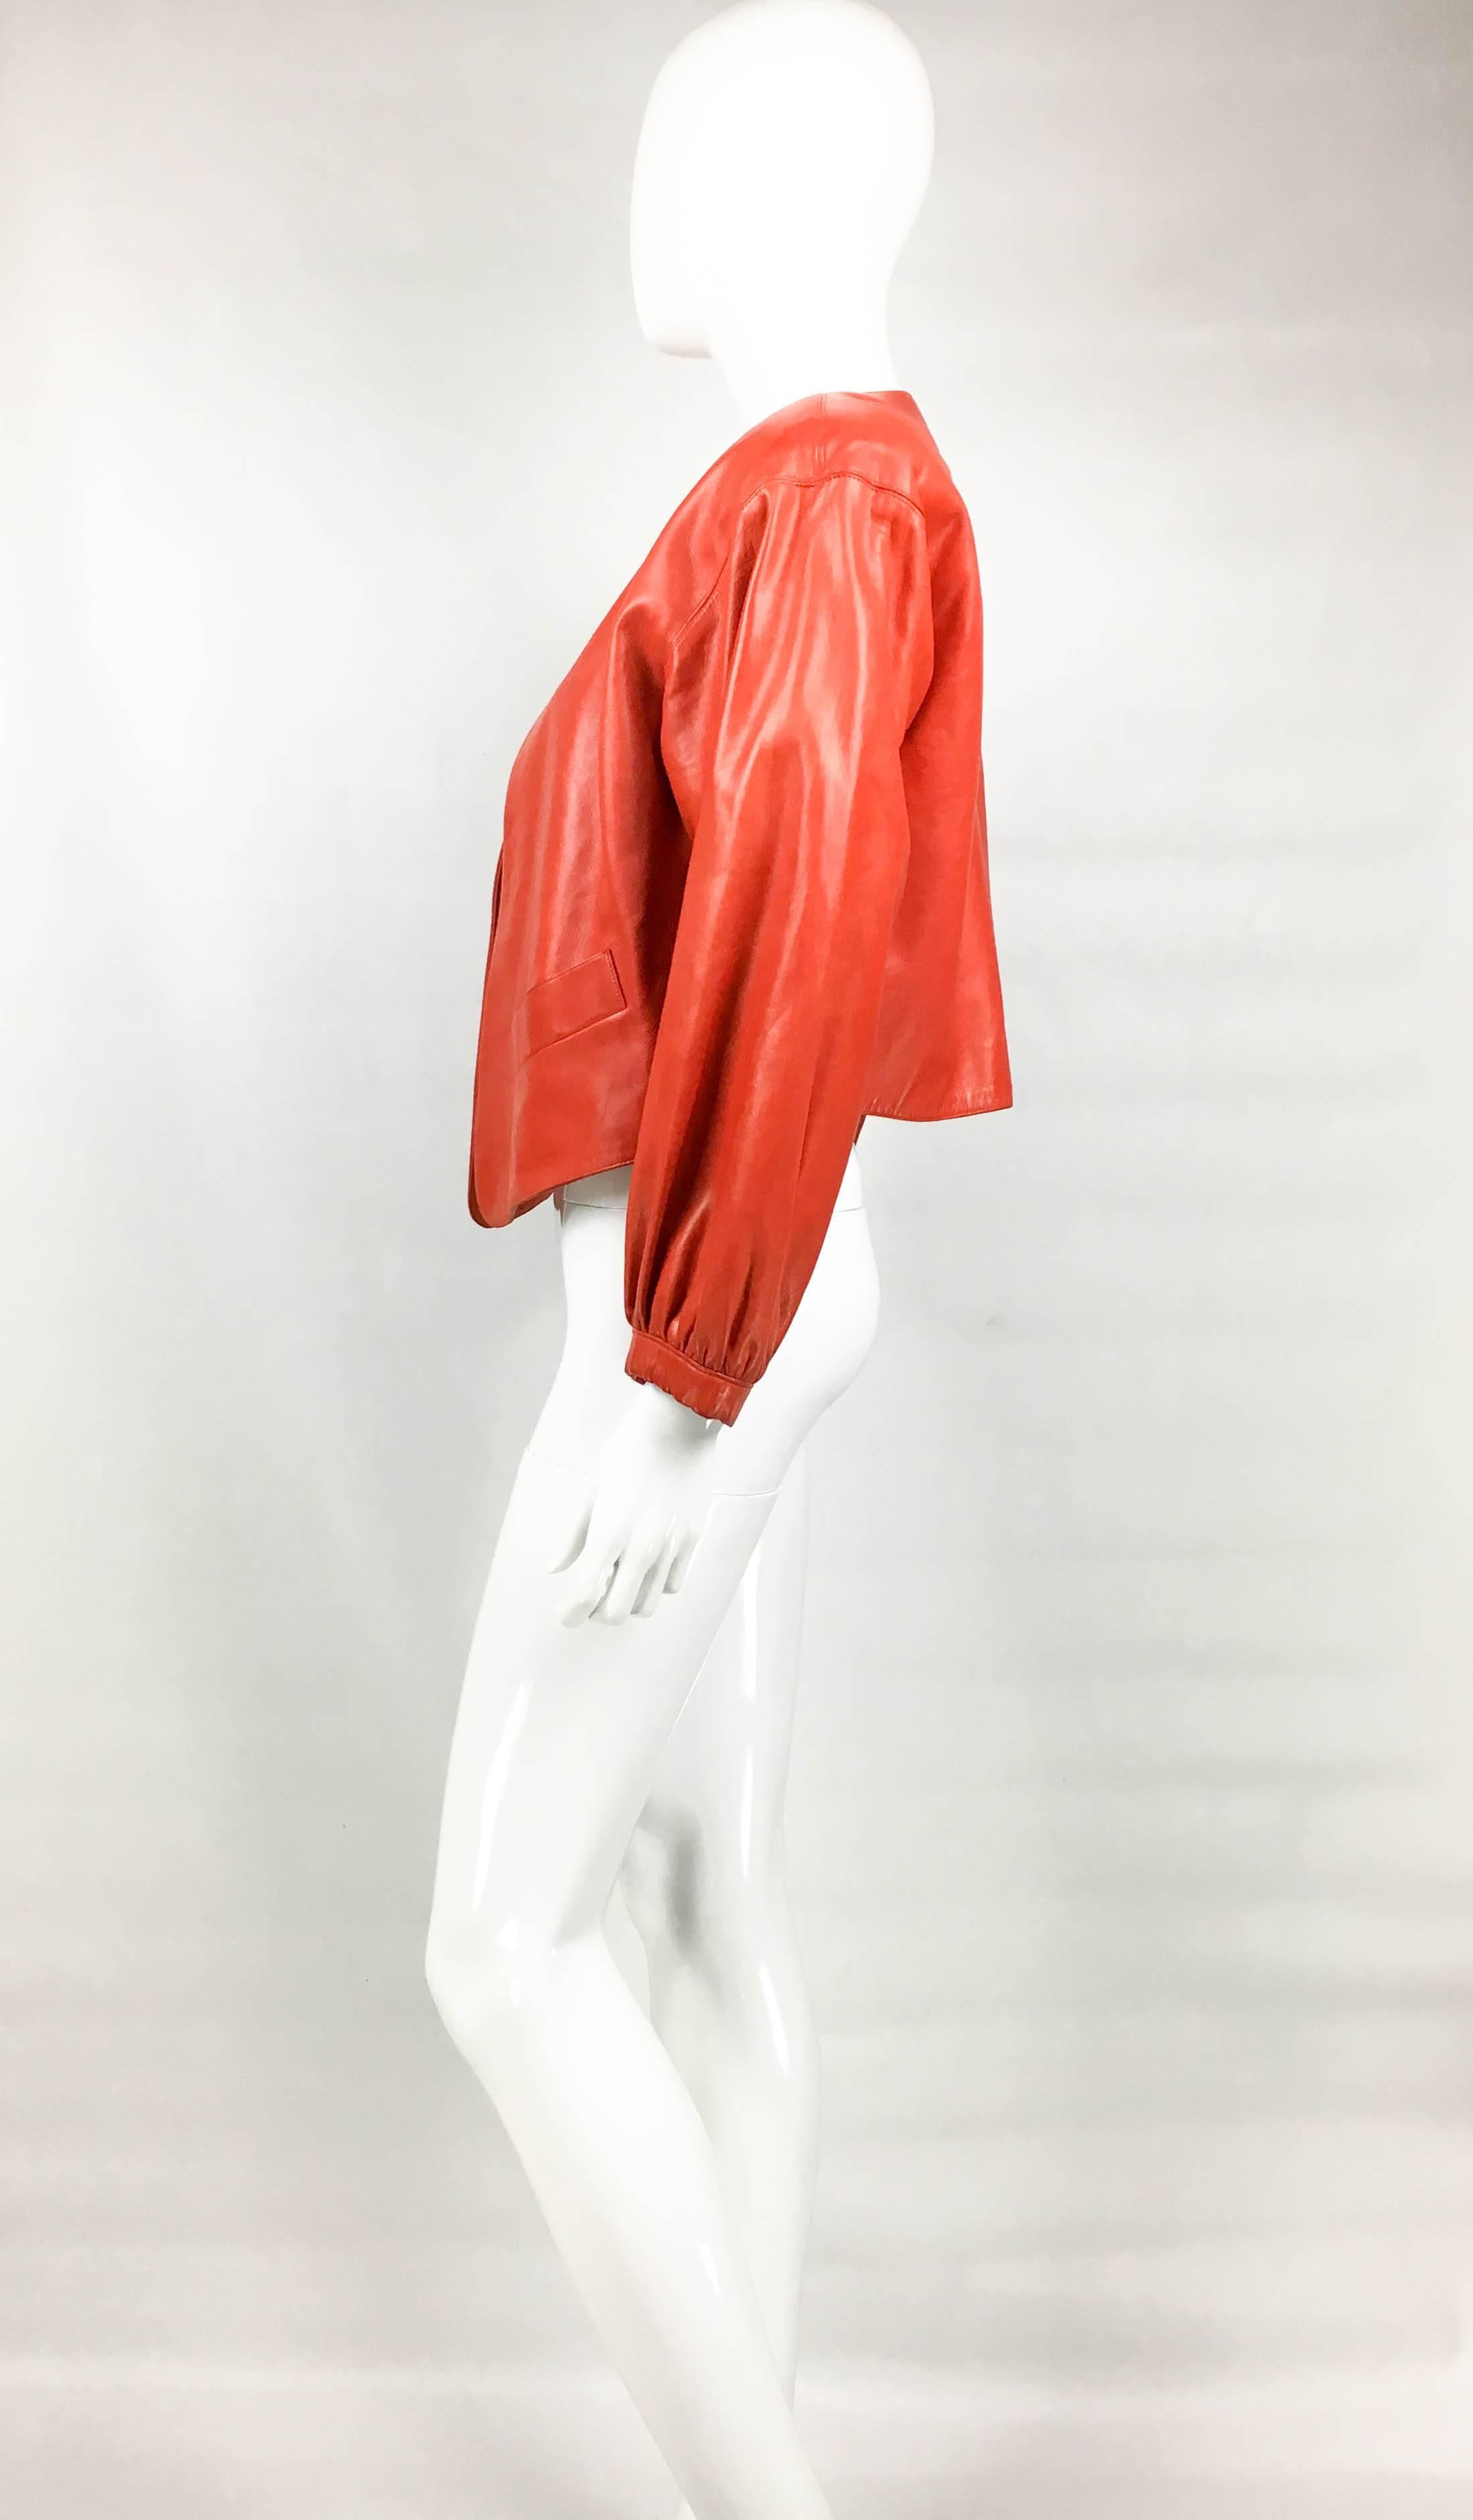 1980s Yves Saint Laurent Red Soft Leather Jacket In Excellent Condition For Sale In London, Chelsea